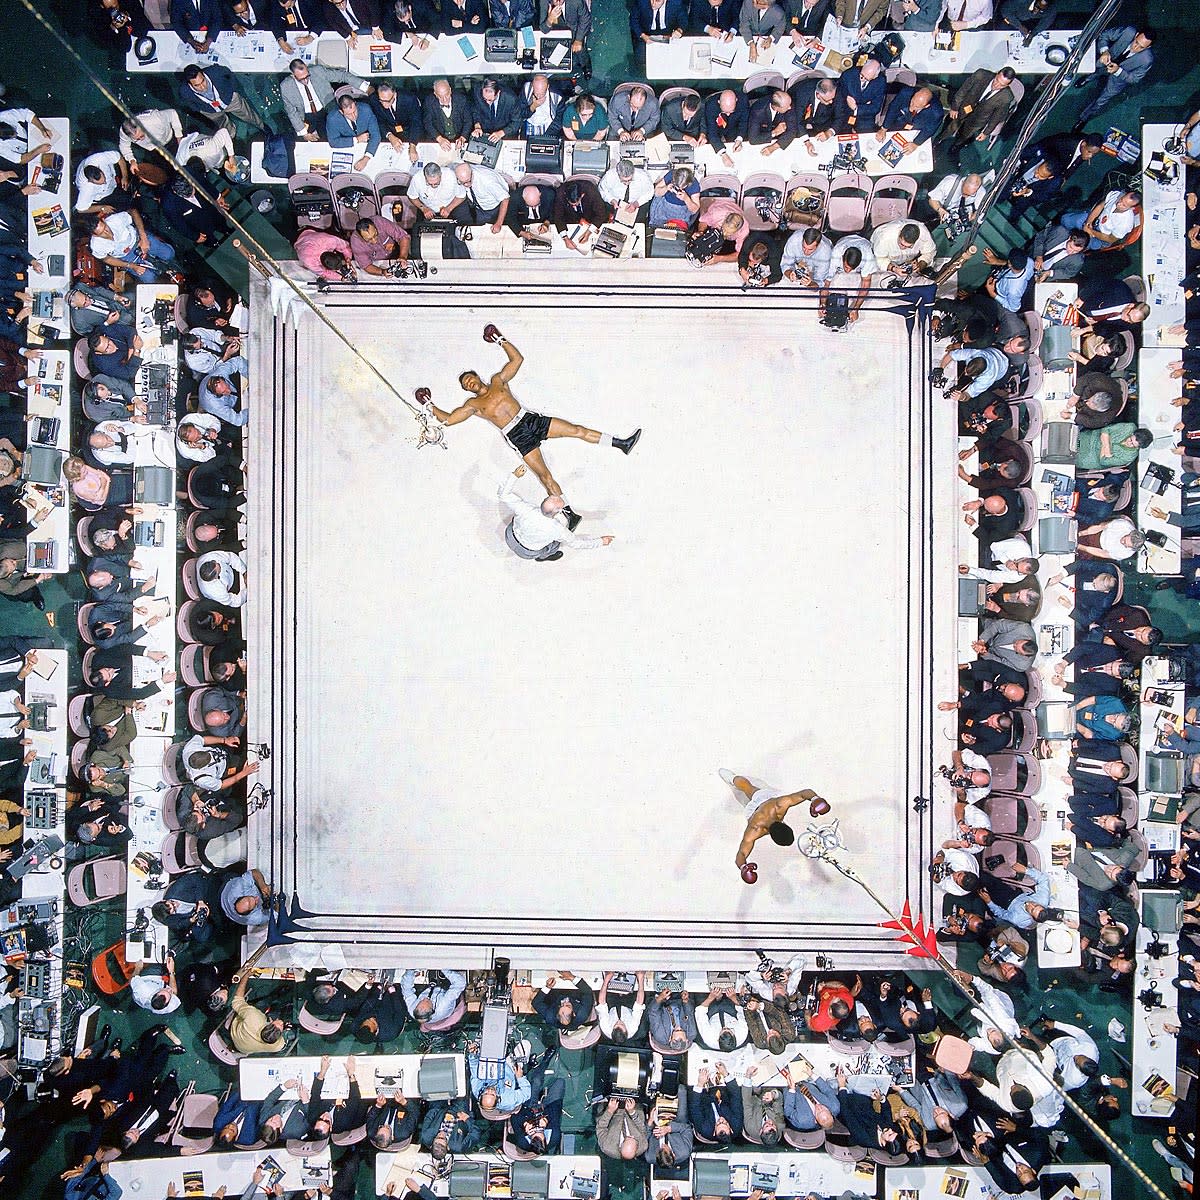 iconic sports images